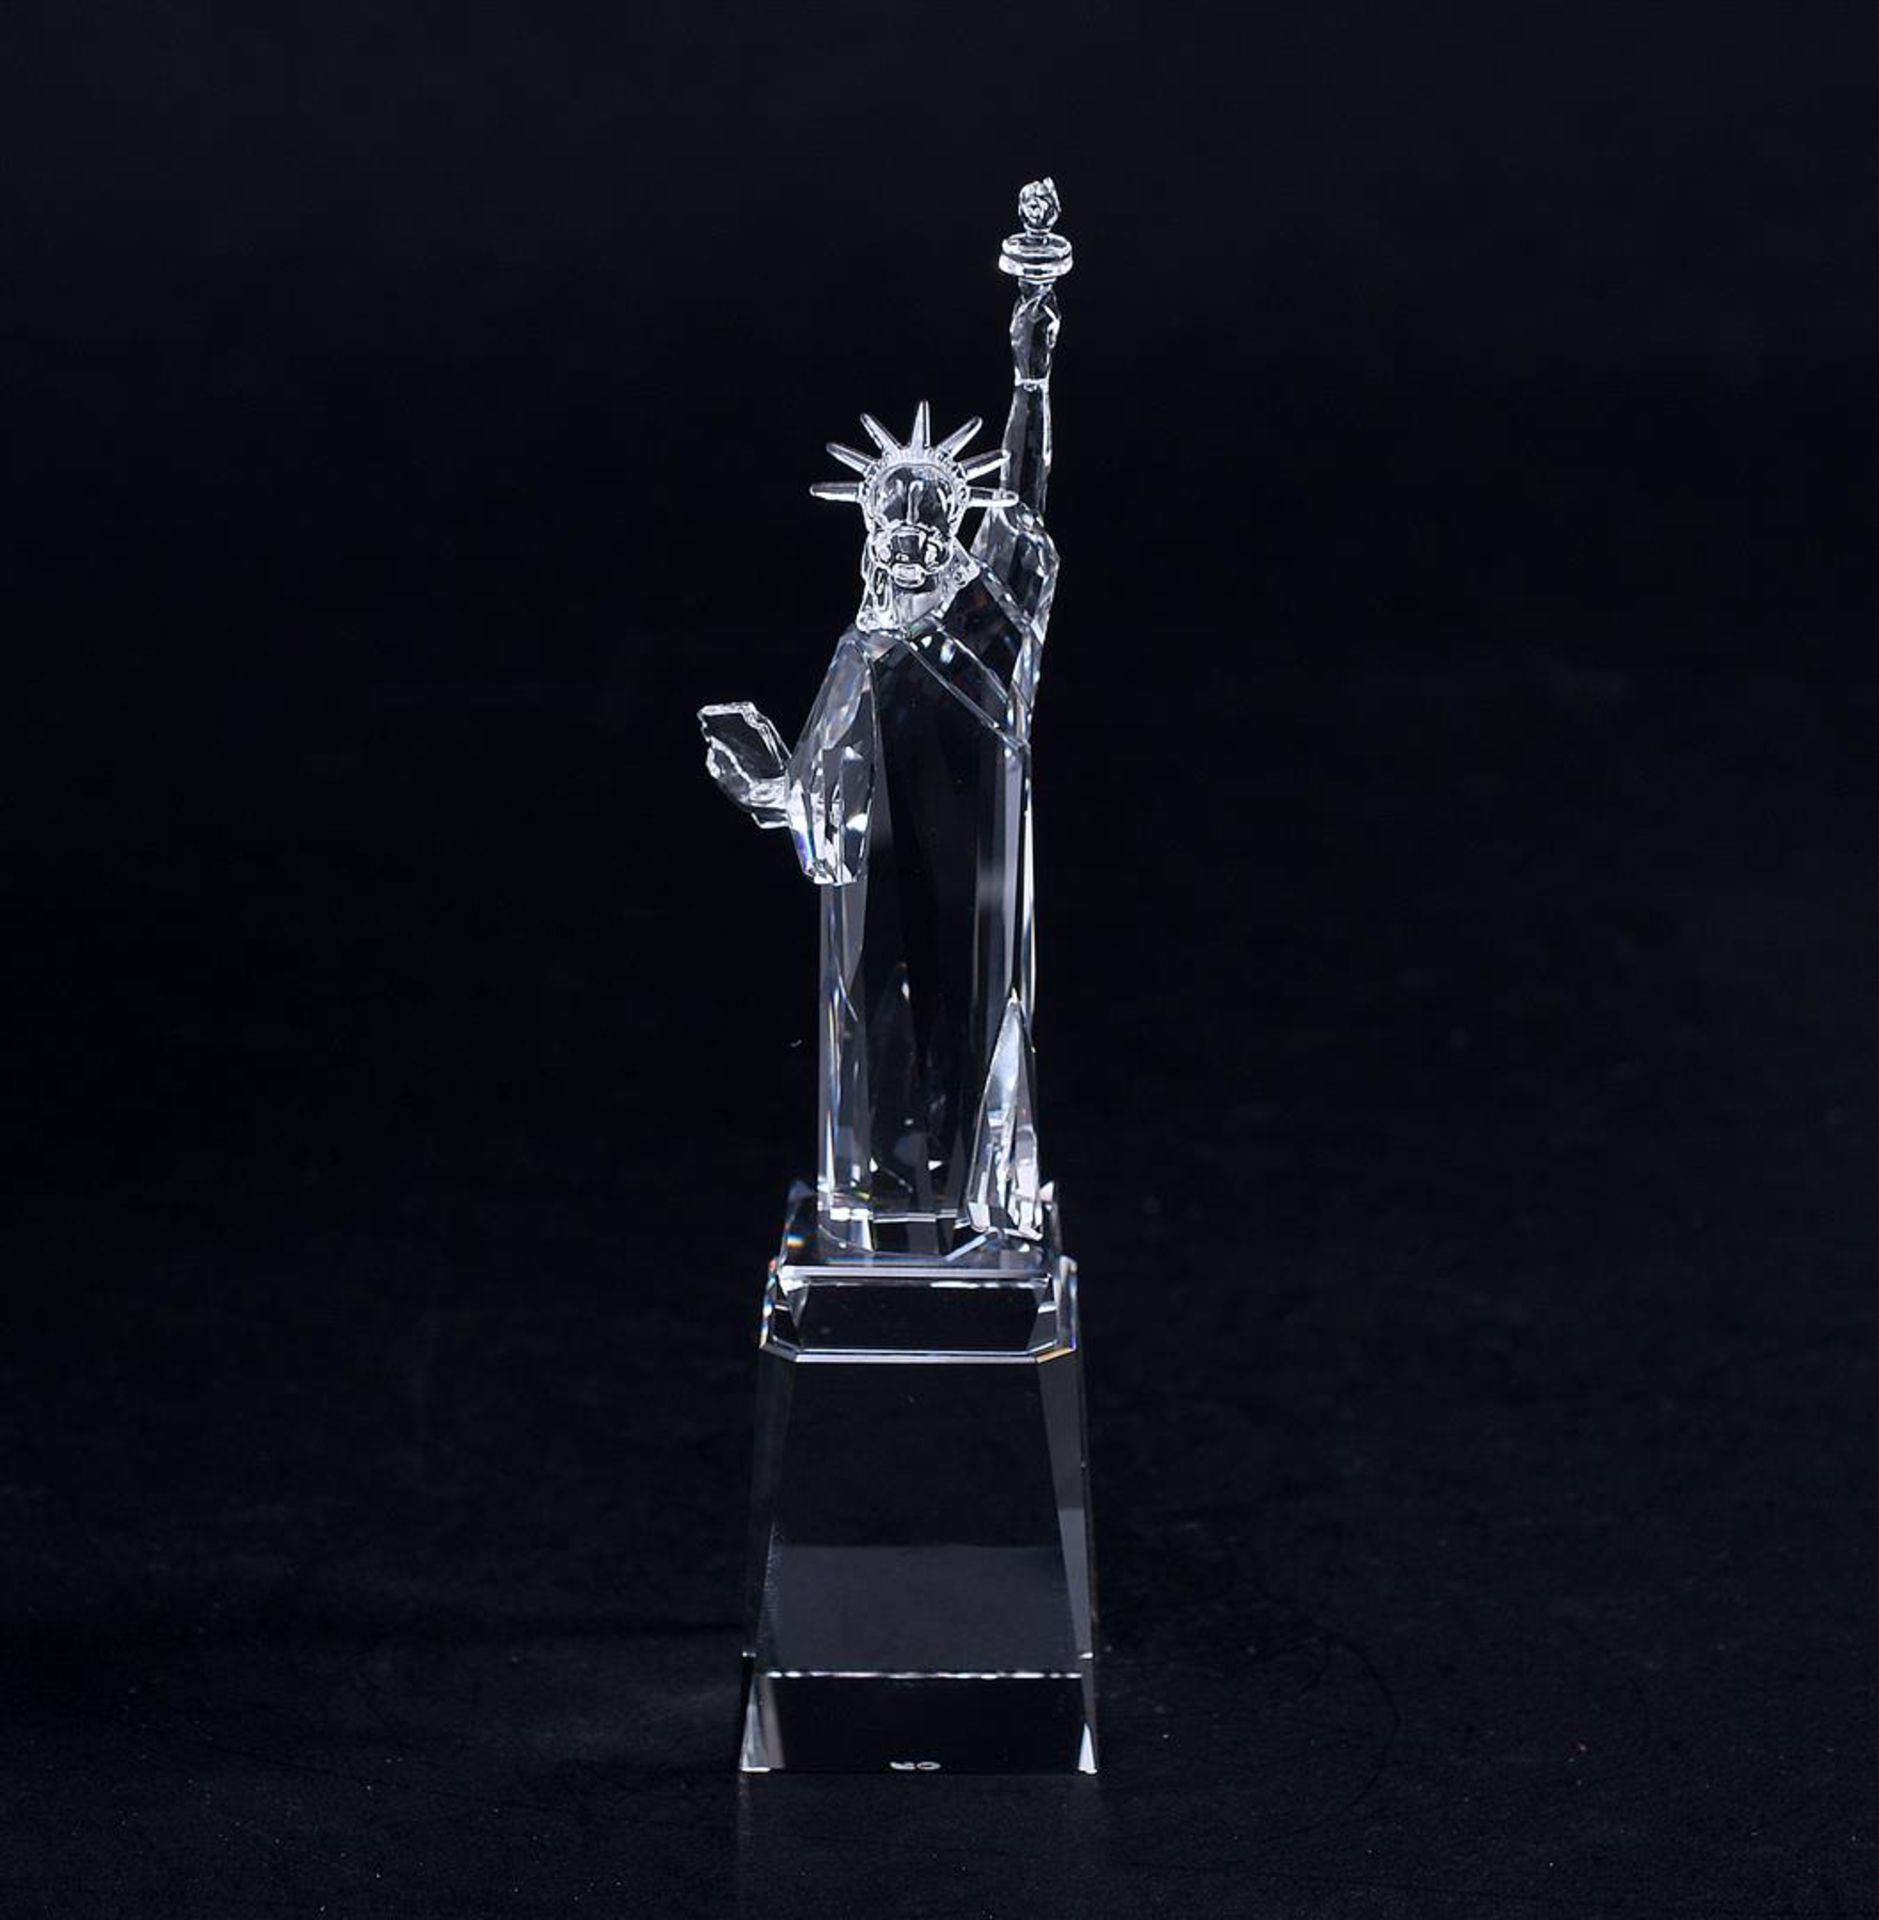 Swarovski, Statue of Liberty Year of issue 2019, 5428011. Includes original box.
3.1 x 3.1 x 13.6 cm - Image 3 of 4